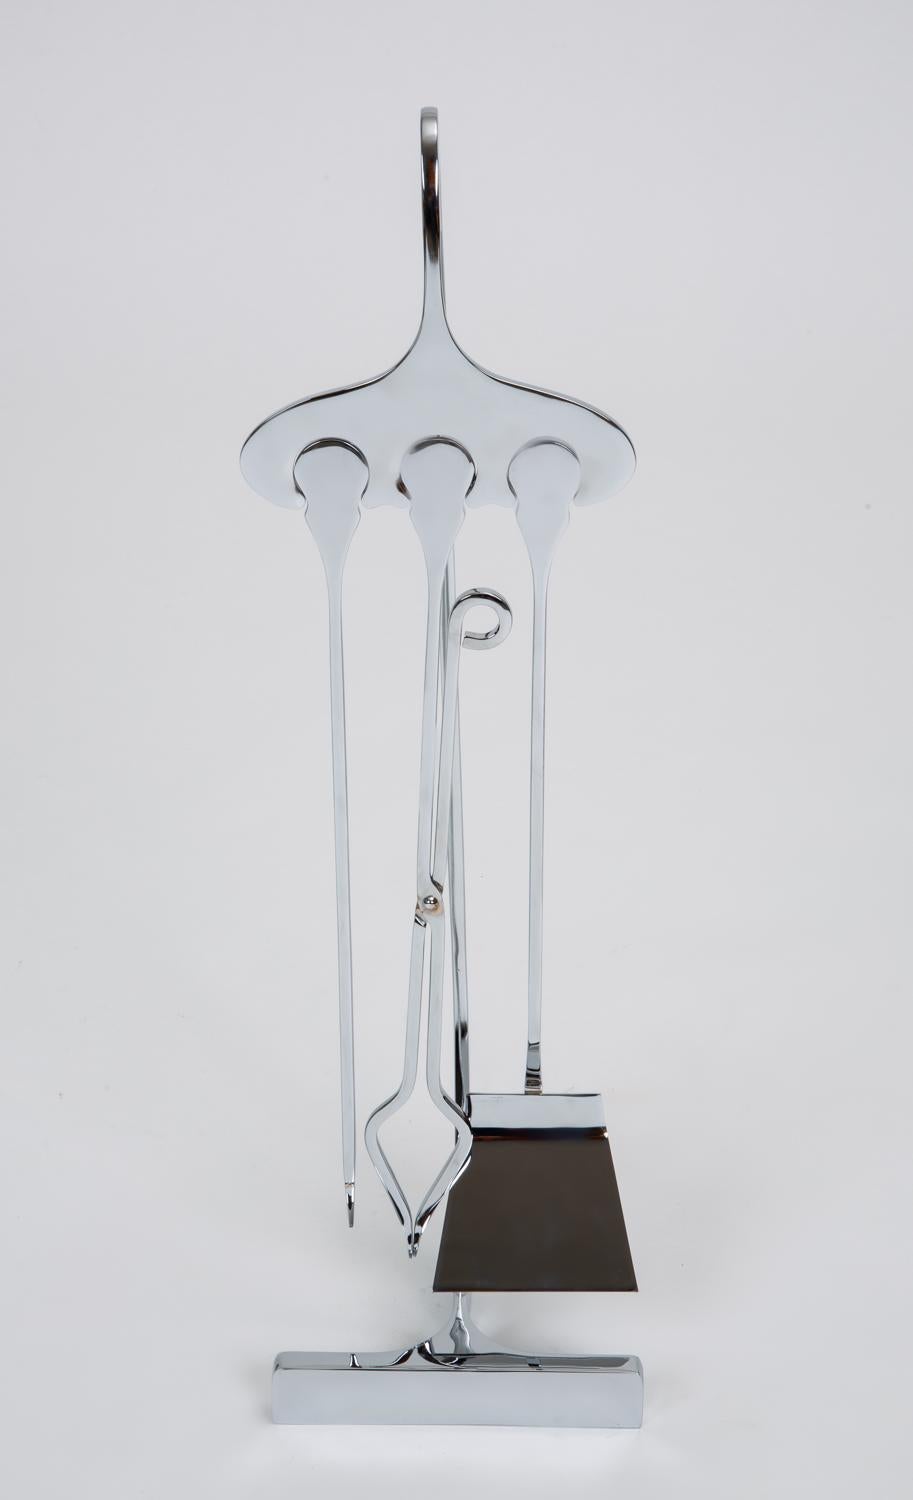 An inventive set of fireplace tools in the style of Jacques Charles’ curvilinear work for the French Ligne Inox. A chrome-plated stand holds a matching shovel, poker and tongue. The rounded handles of the accessories fit into complimentary notches